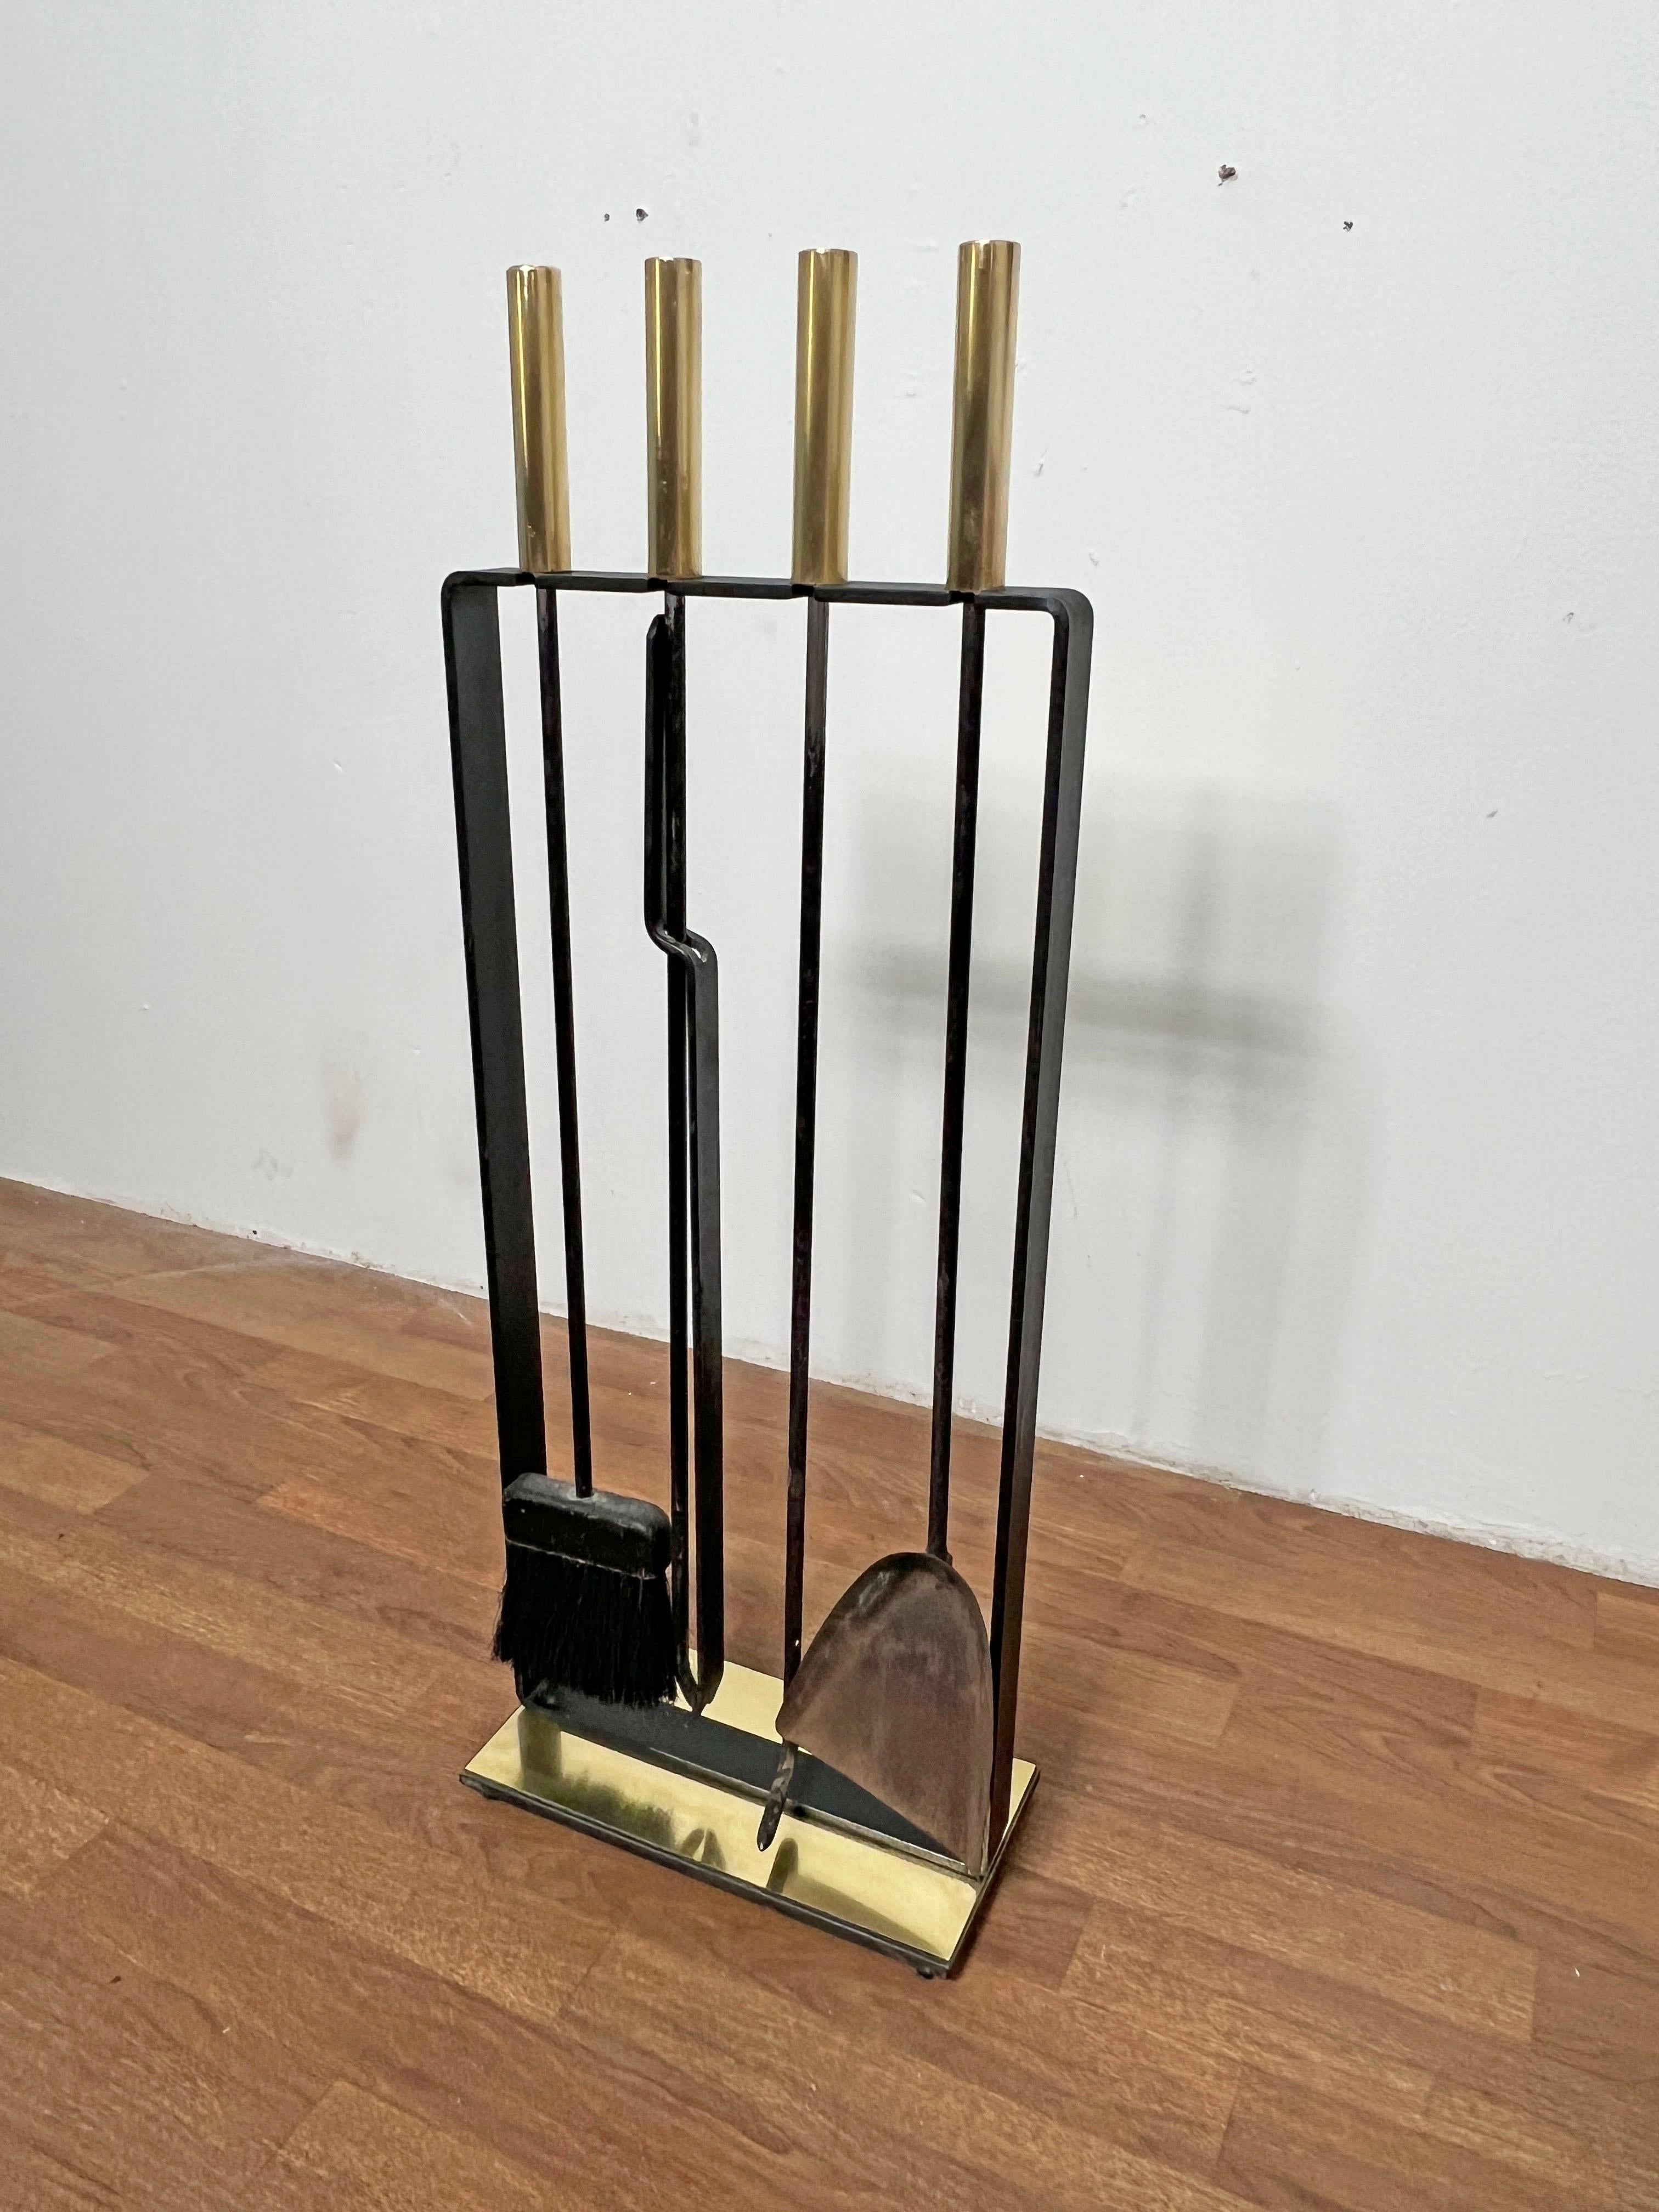 Set of four fireplace tools with stand in wrought iron with brass accented base and handles by Pilgrim Manufacturing Co., circa 1960s.